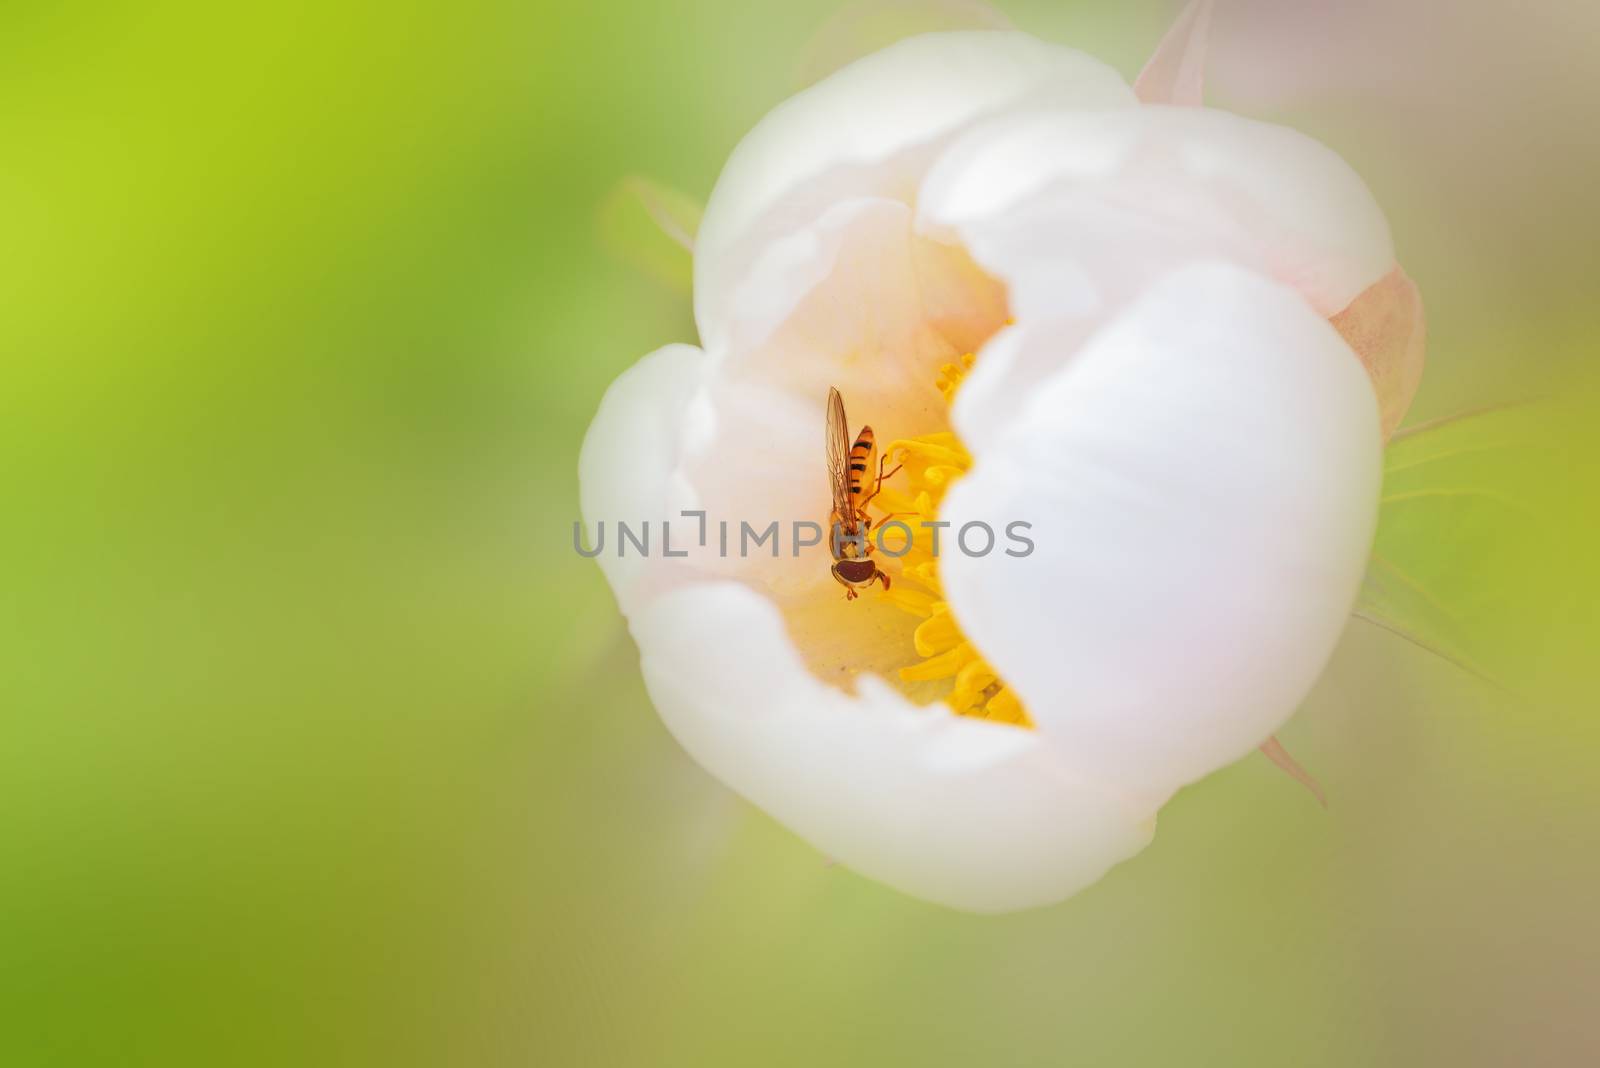 Forest flower with an insect. Blurred background